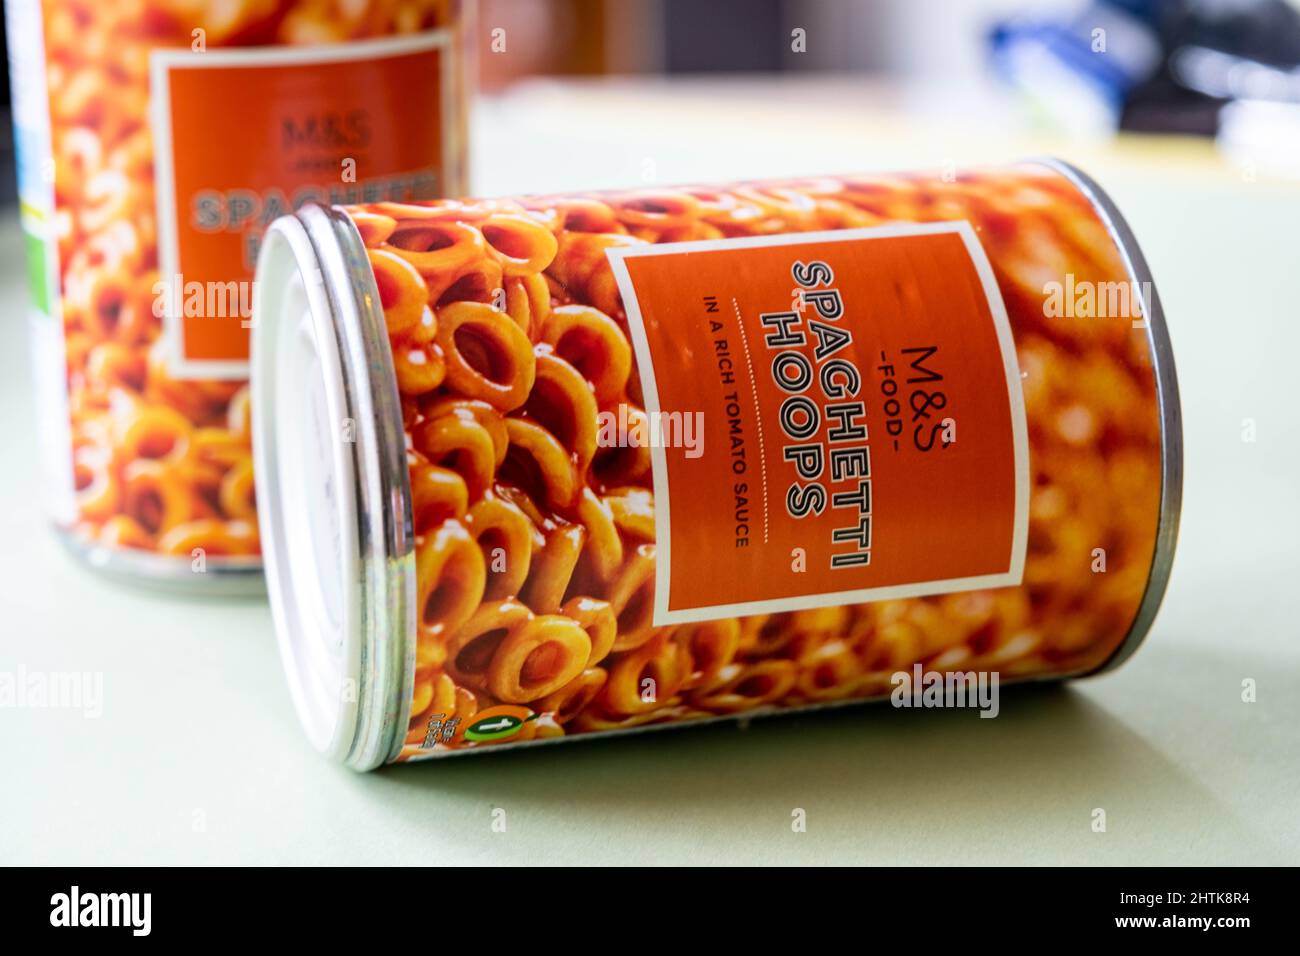 England UK, March 01 2022, Tin Of Marks And Spencer Own Brand Spaghetti Hoops In Tomato Sauce With No People Stock Photo